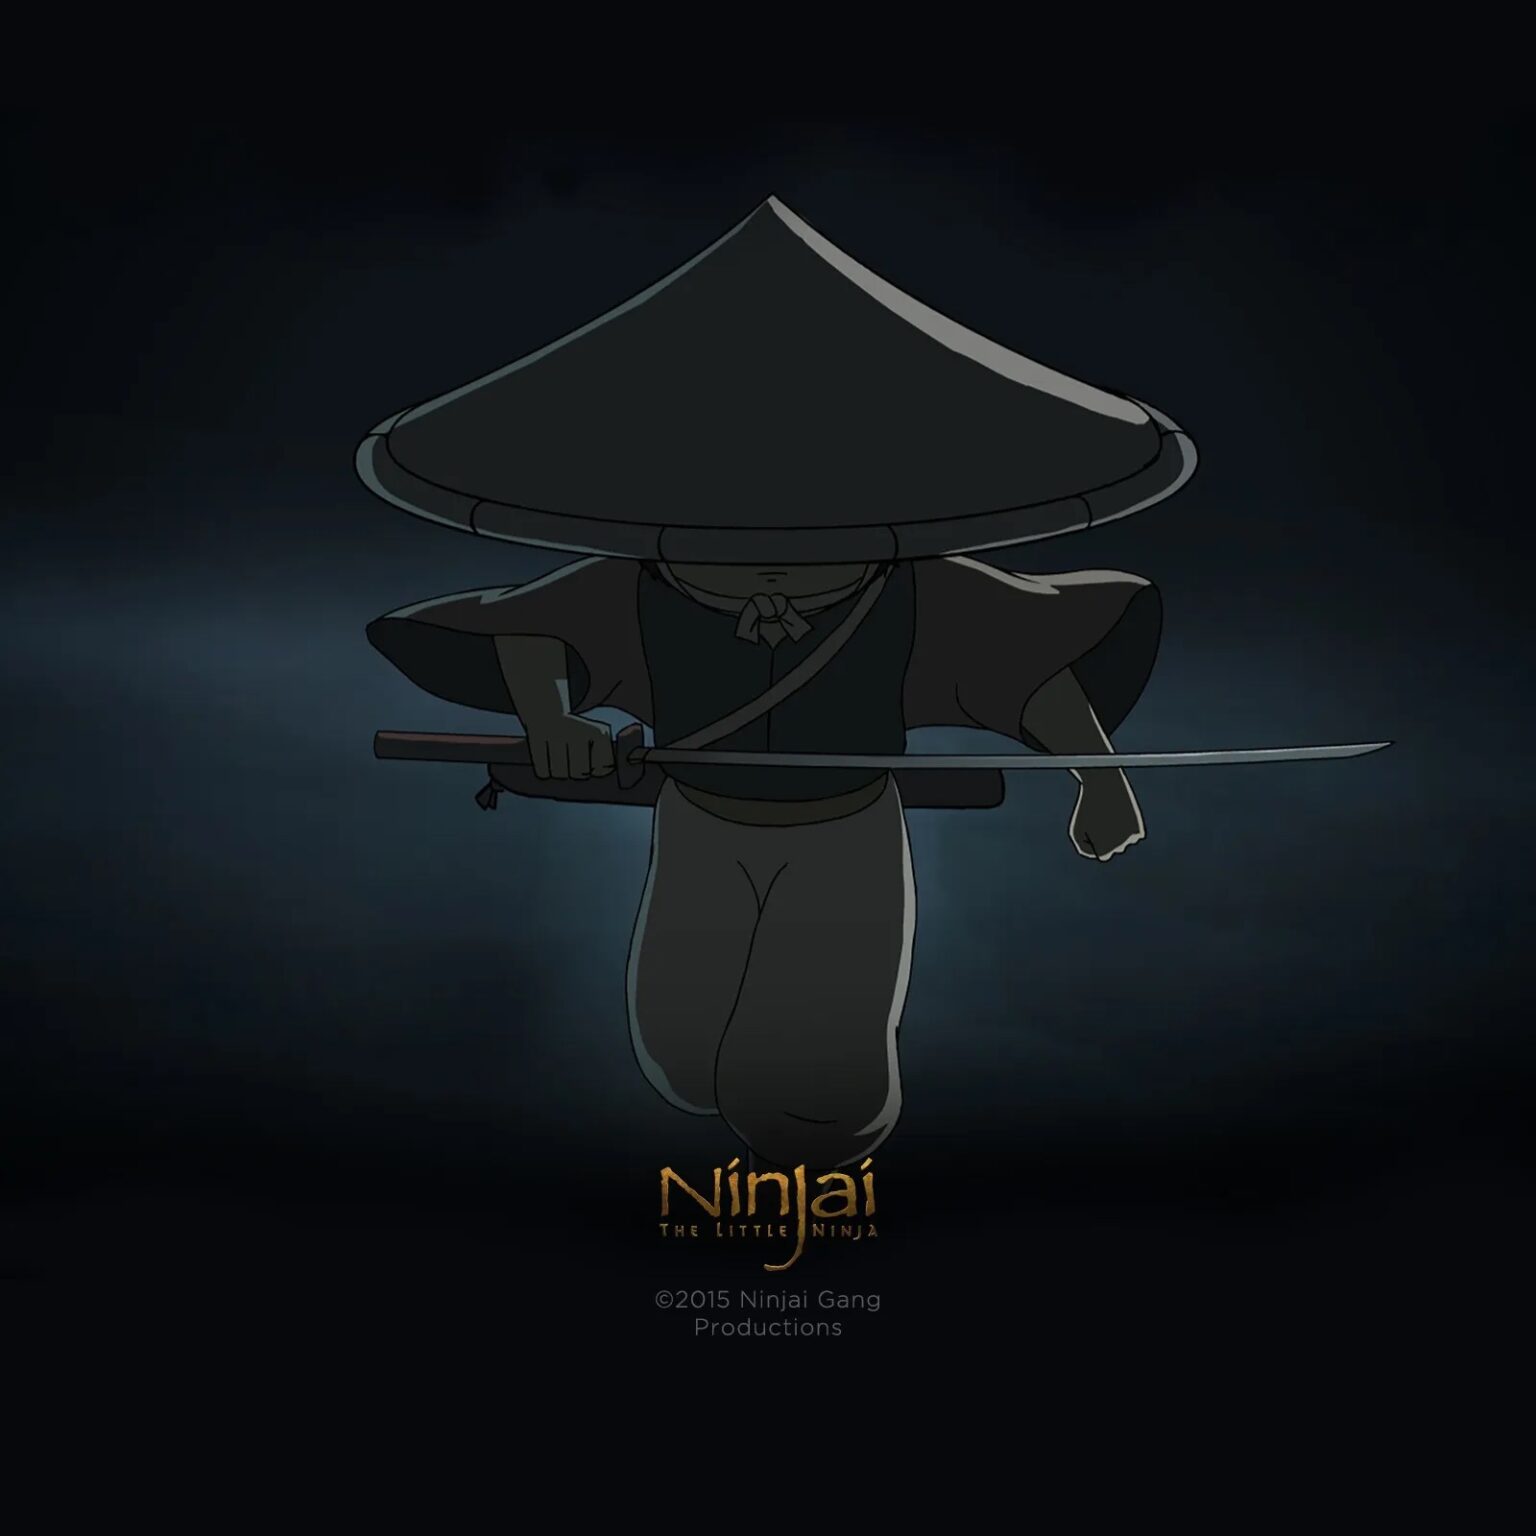 'Ninjai: The Little Ninja' back with some sword fighting action like you've never seen before. Prepare to fall in love with 'Ninjai' all over again.